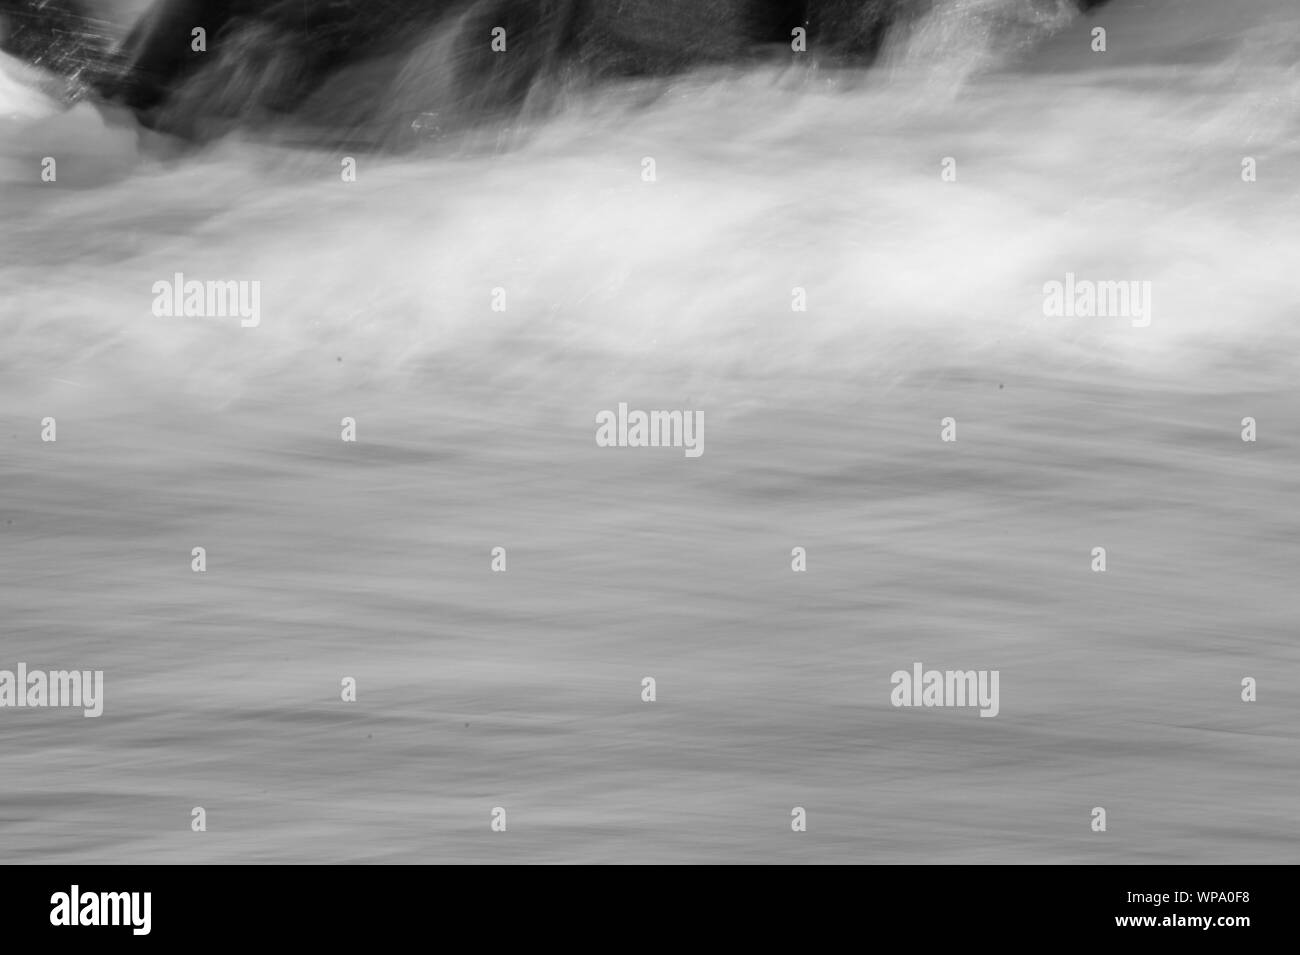 Black and White Abstract photographs of seascape with strong backwash with low shutter speed and exaggerated blurring of the motion. Stock Photo